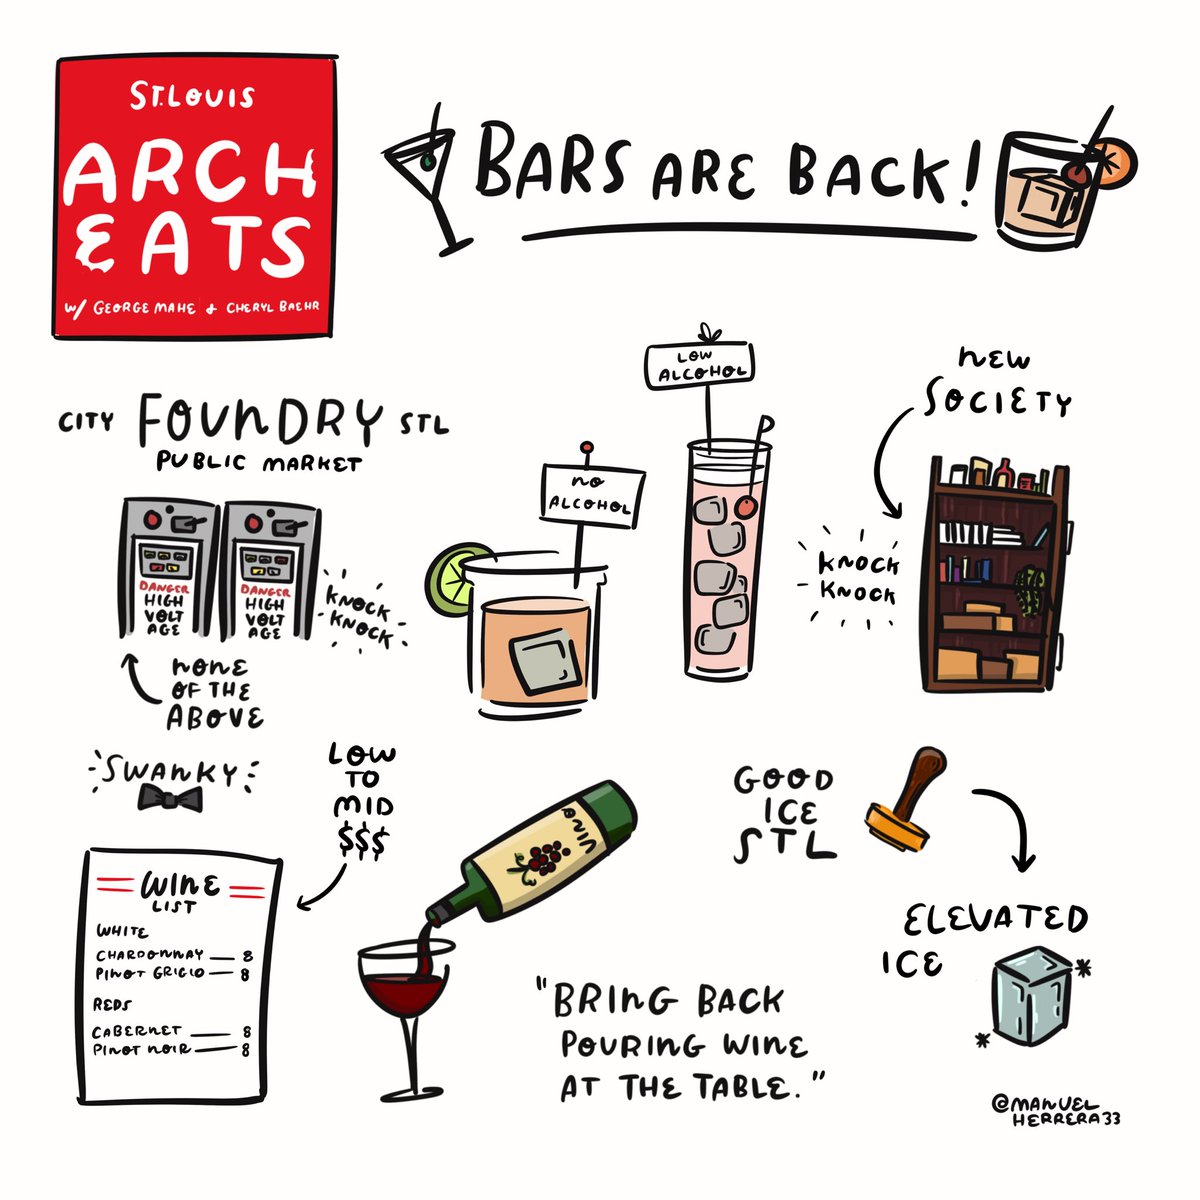 ⬅️ Swipe Left Some sketchnote illustrations from @stlmag latest podcast Arch Eats episode Dining and Drink Trends. #stlouis #stl #saintlouis #thelou #draw #sketch #doodle #sketchnote #sketchnotes #artistoninstagram #art @stlmag_dining @stlmag